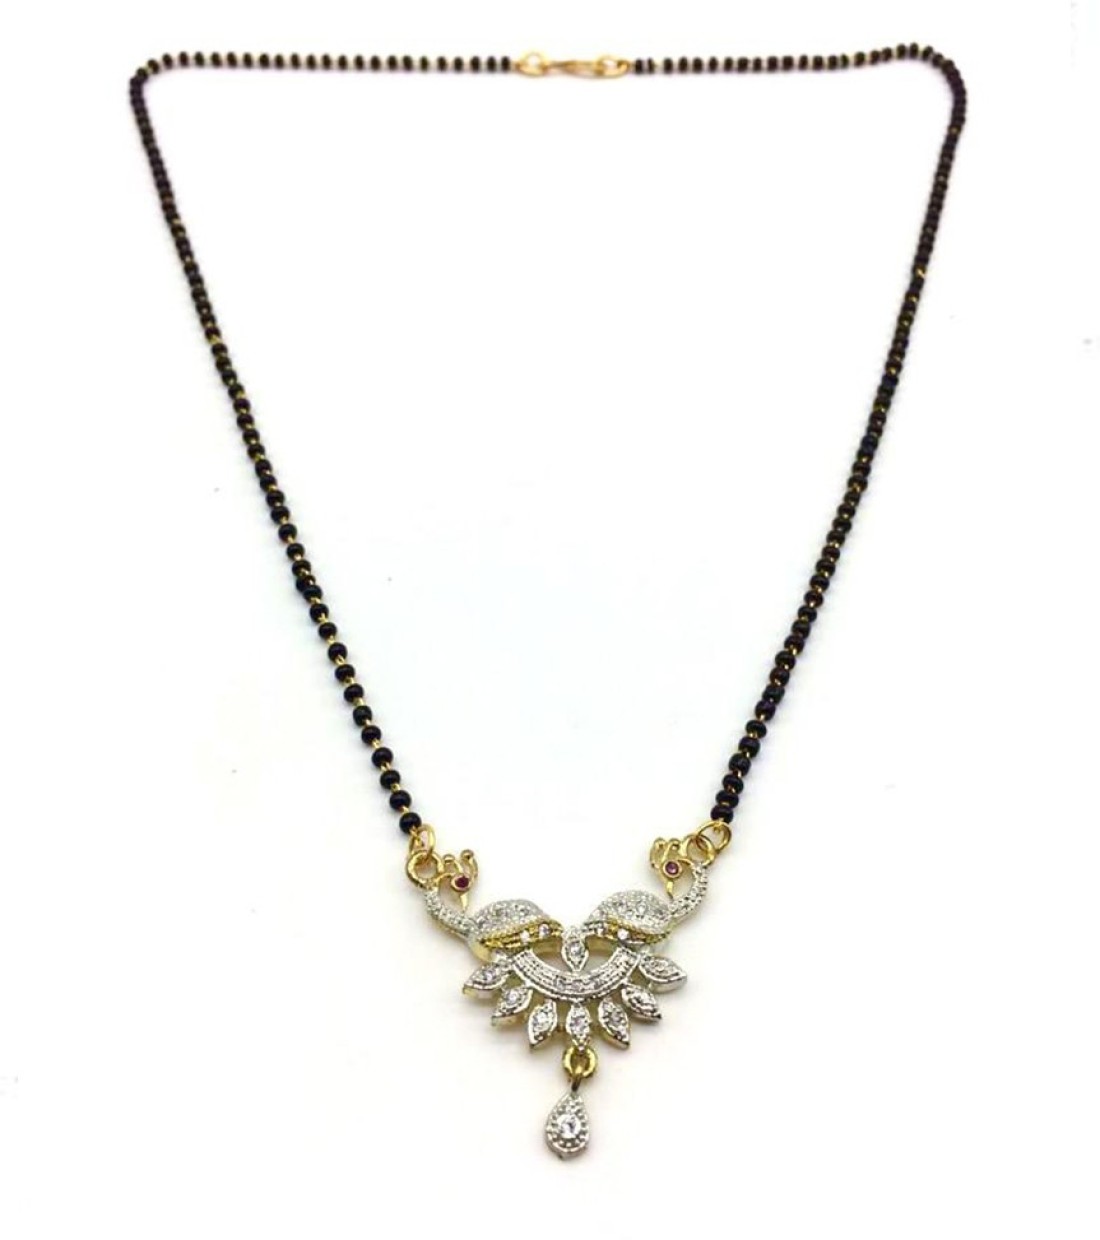 Black Beads Single Chain Necklace 